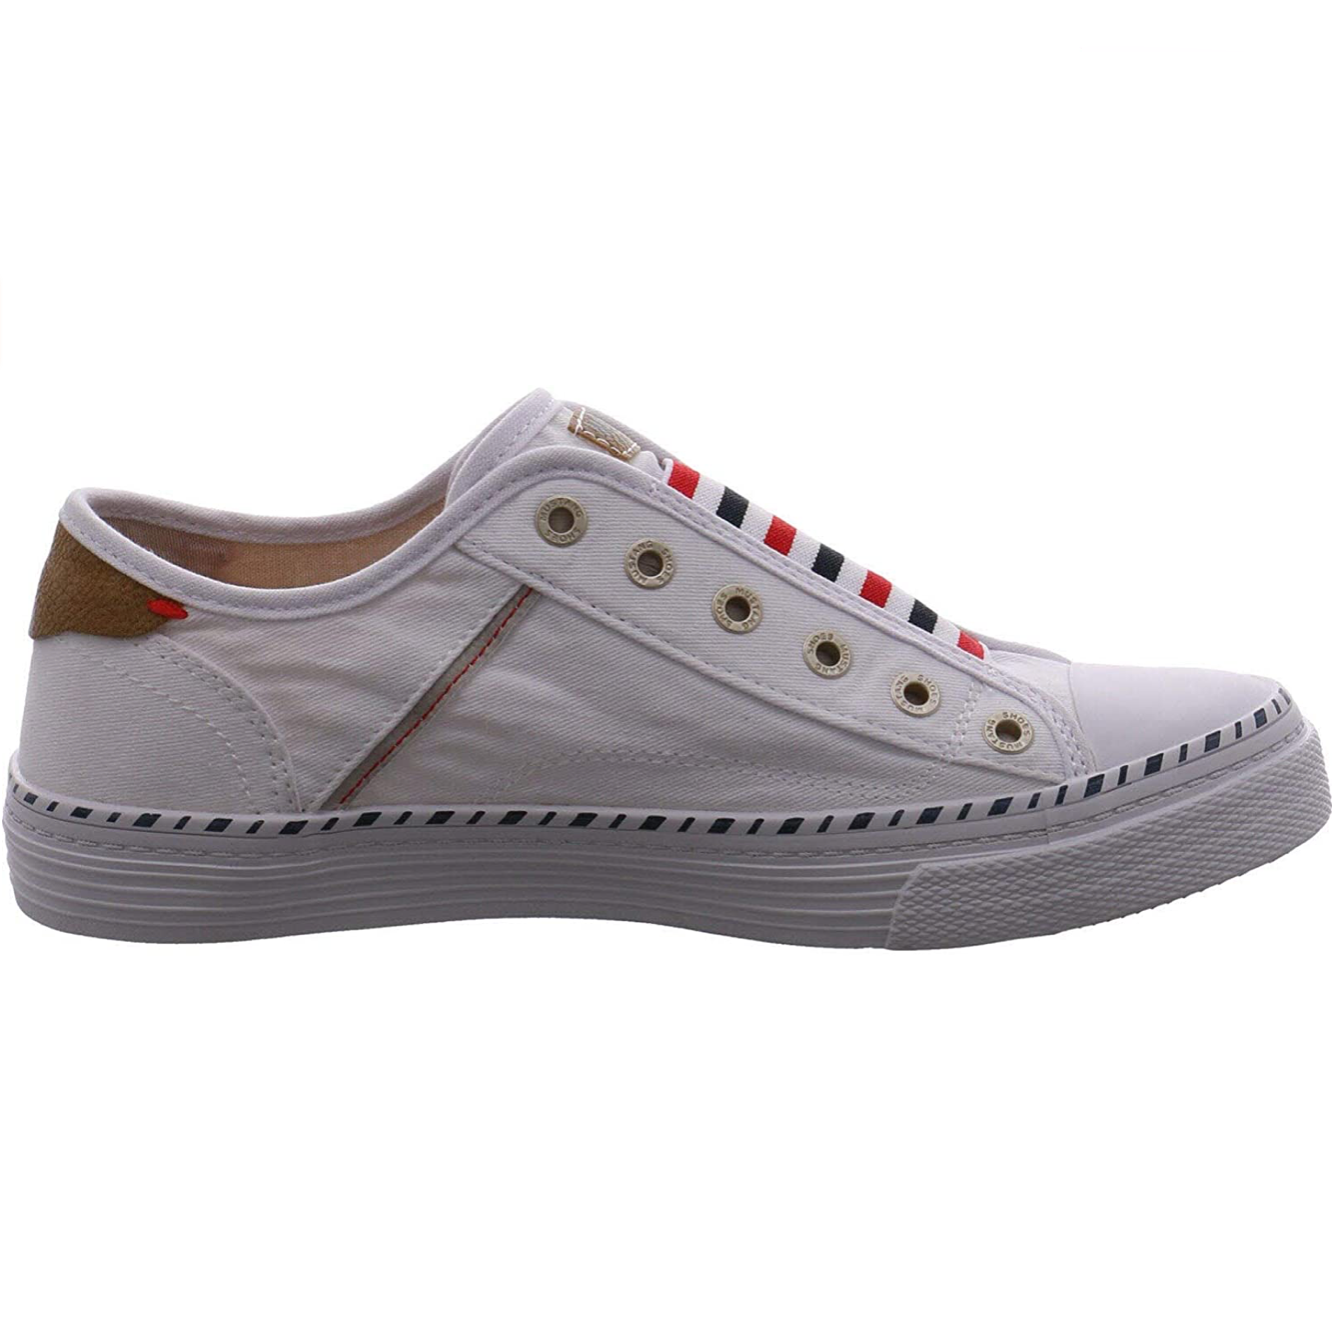 Mustang - Women's Laceless Trainer - White / Red / Blue